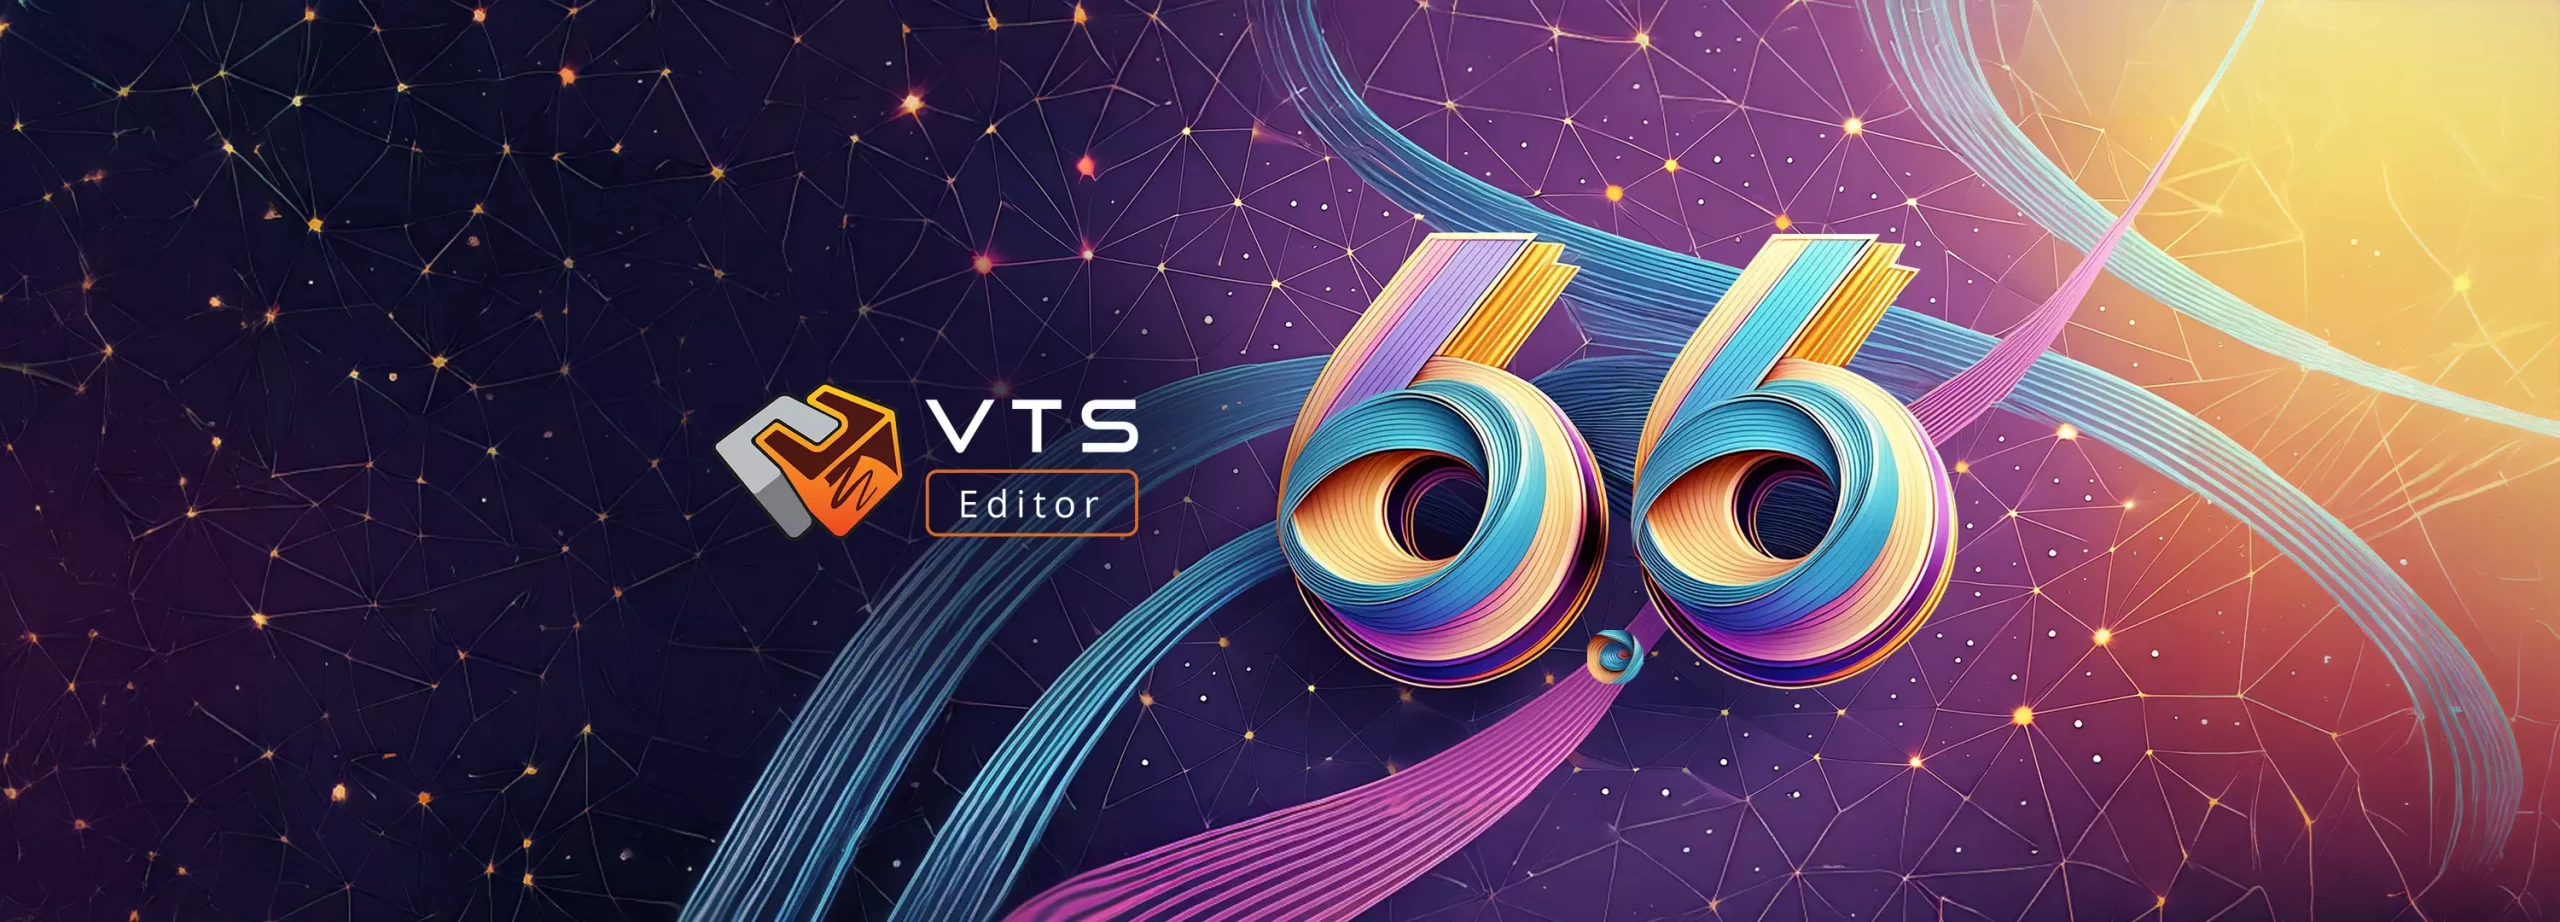 Discover The New 6.6 Version Of VTS Editor